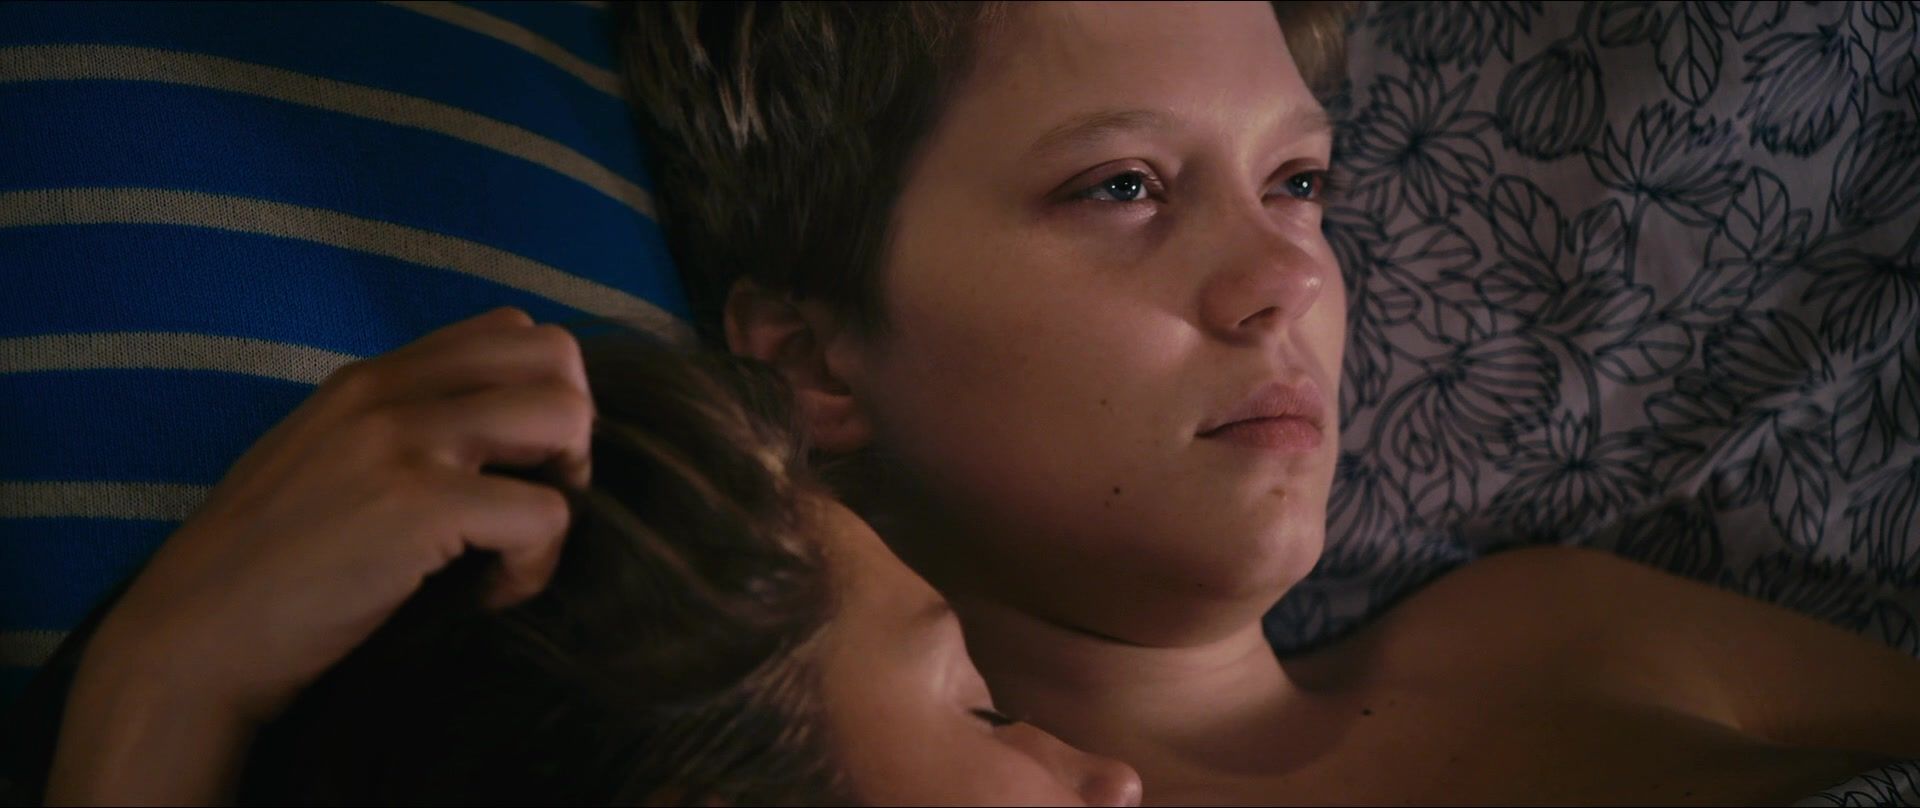 Qwertty Best lesbian scene in movies | Adele Exarchopoulos nude & Léa Seydoux naked | The film "Blue Is The Warmest Color" (2013) Punish - 1